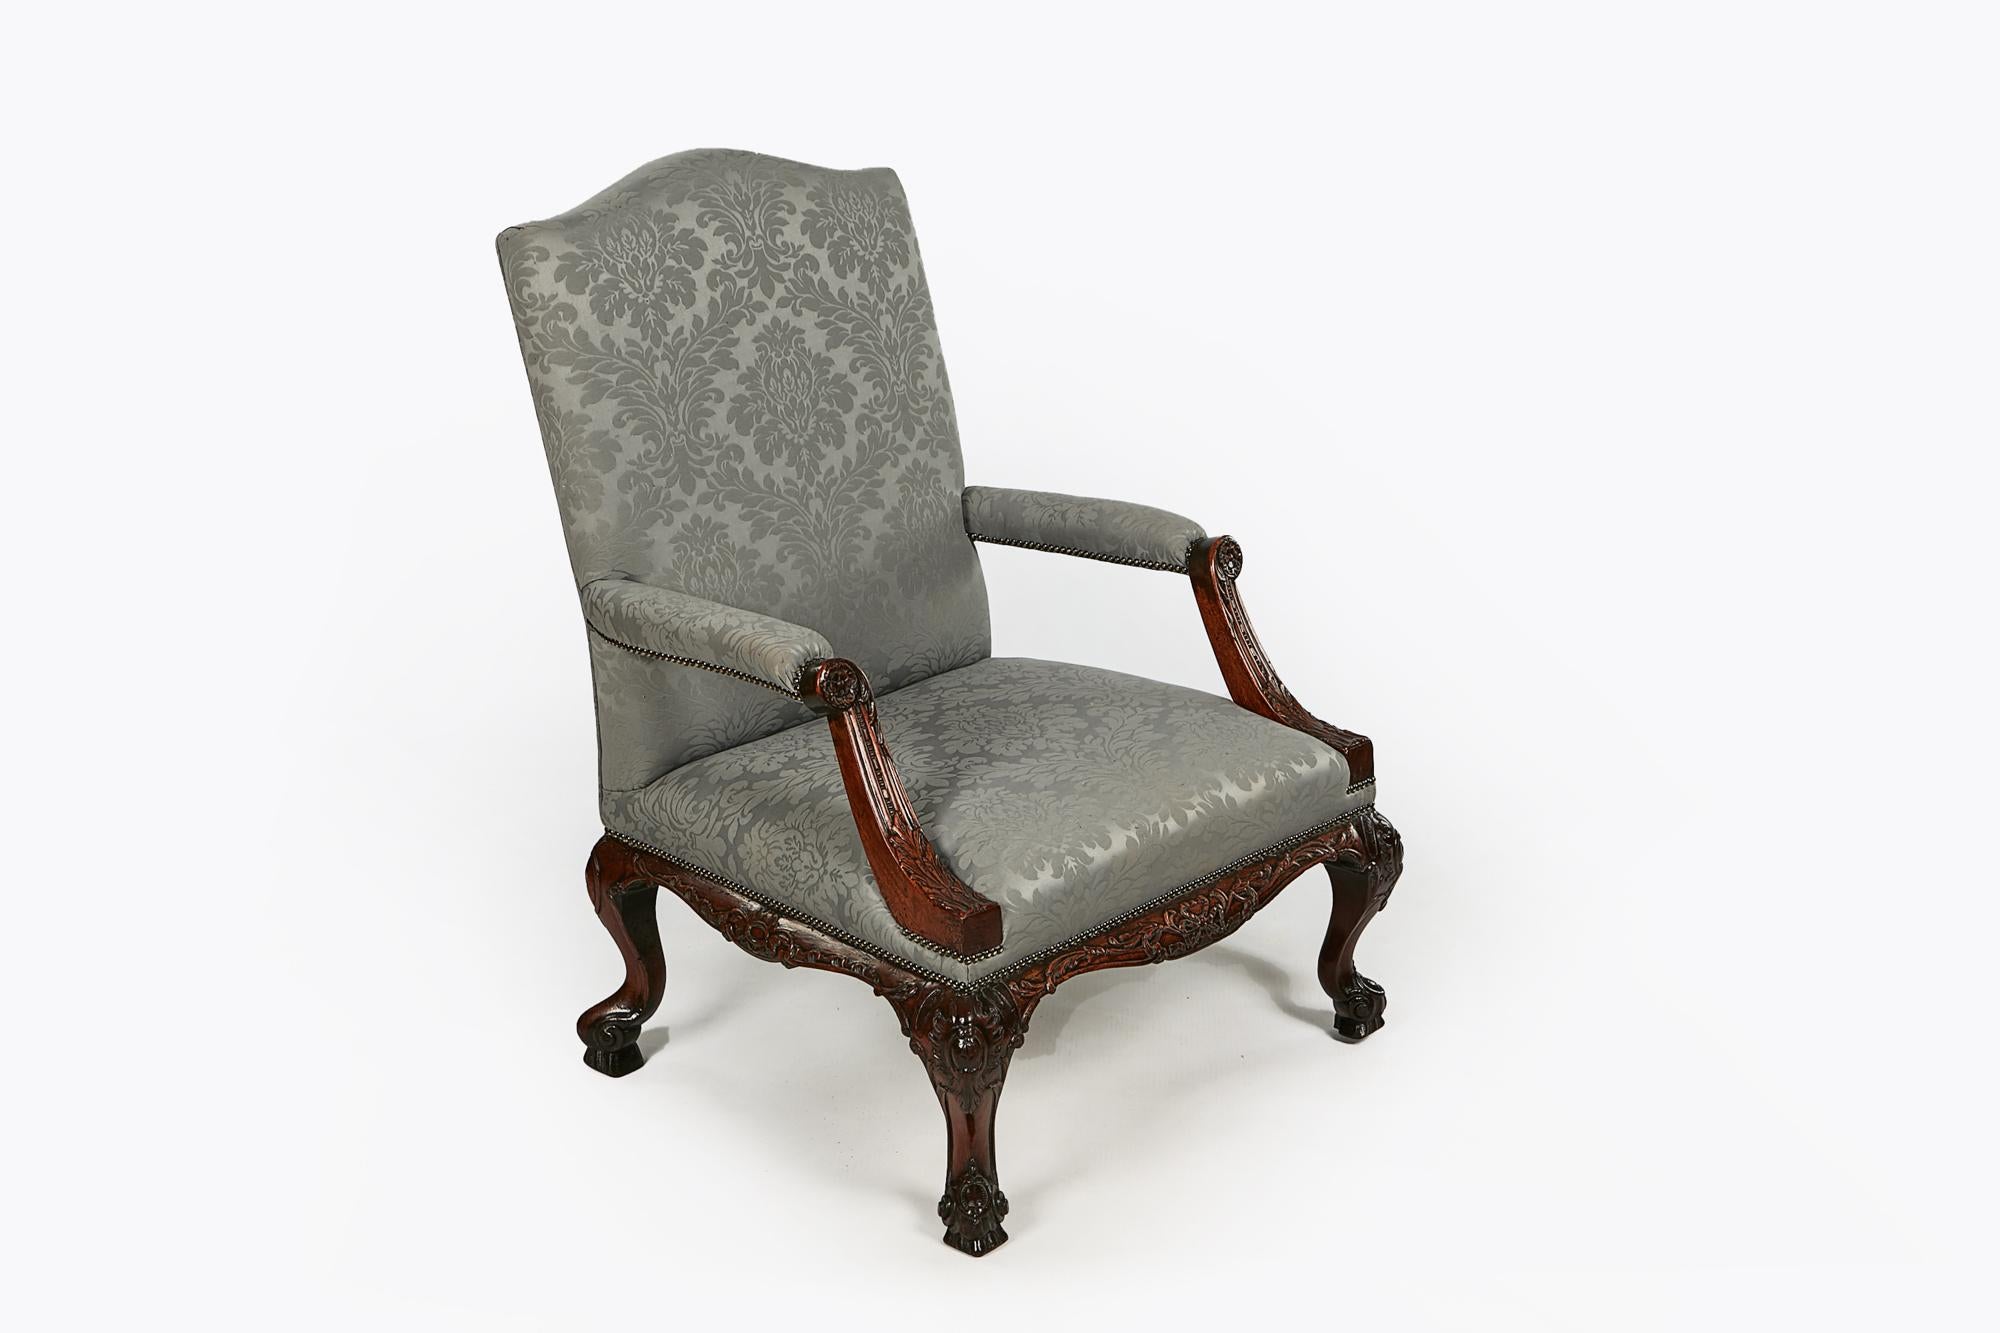 18th century Gainsborough armchair in the manner of Chippendale with ribbon carved apron supported by cabriole leg adorned with C-scroll motif terminating on scroll foot with acanthus leaf carving.